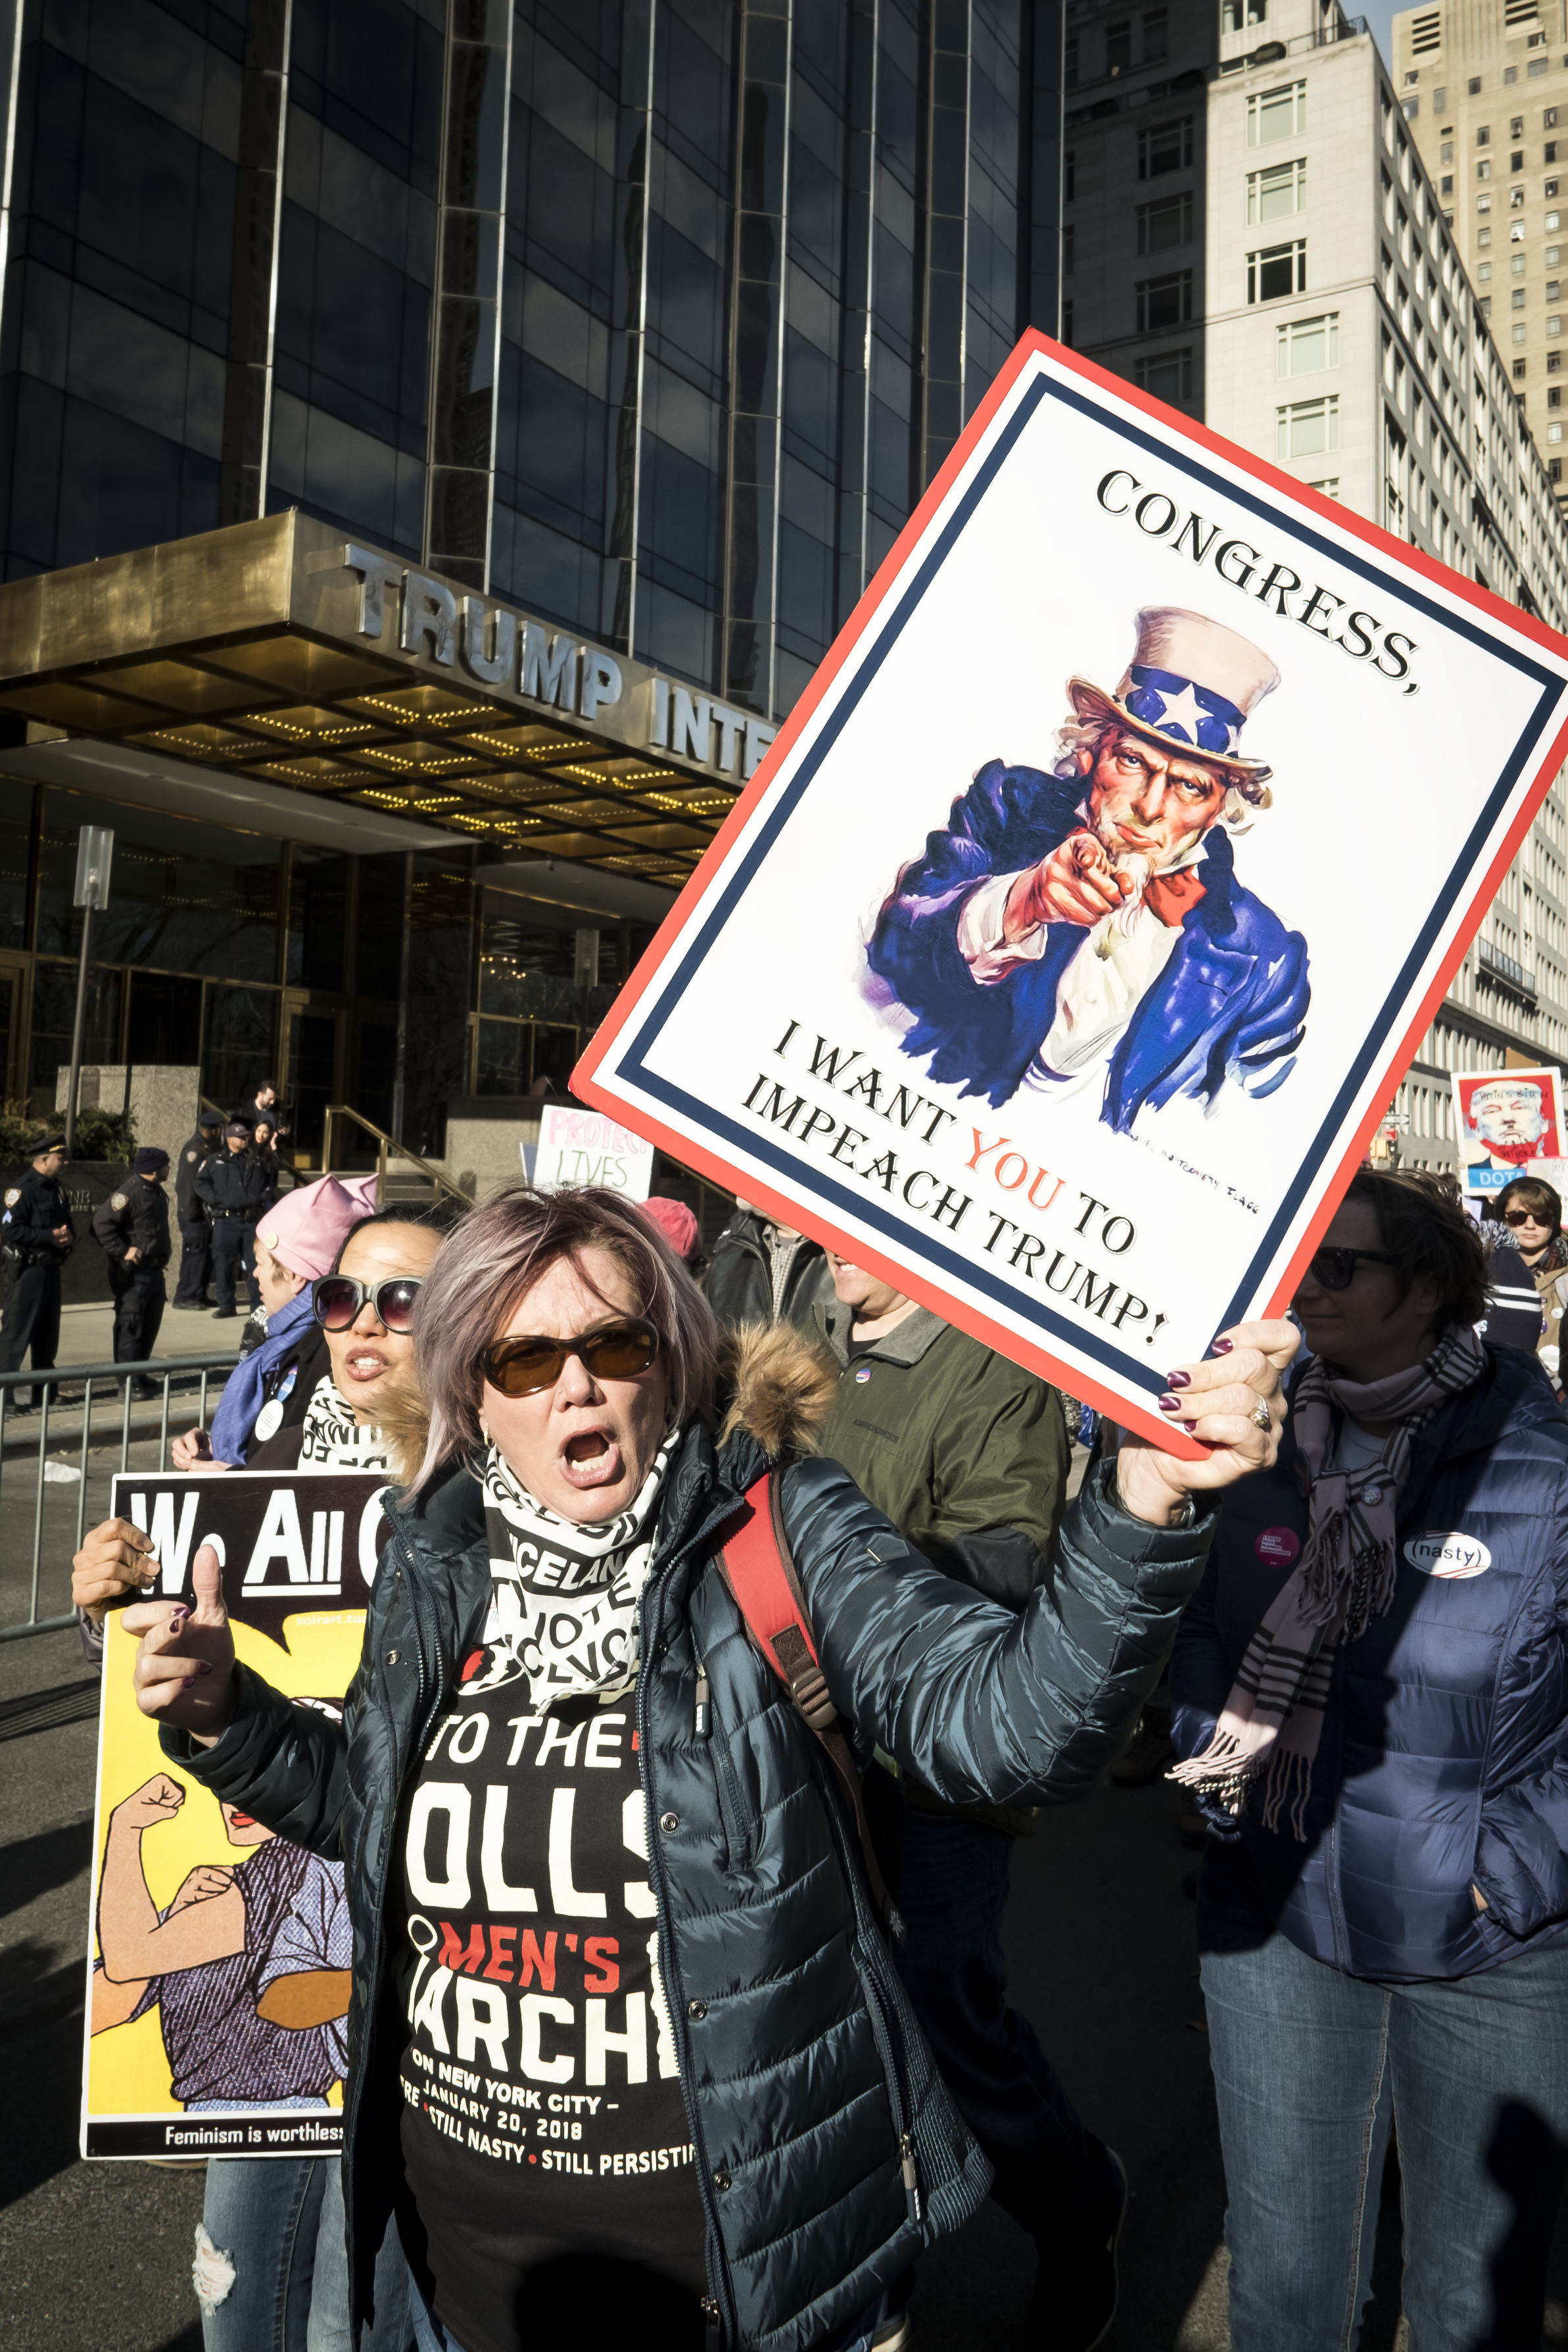 NEW YORK, NY - JANUARY 20: A demonstrator holds up a  banner saying "Congress, I Want You To Impeach Trump" in front of Trump International Hotel and Tower during the second annual Women's March in the borough of Manhattan in New York City, U.S. on Saturday, January 20, 2018. (Ira L. Black - Corbis&mdash;Corbis via Getty Images)